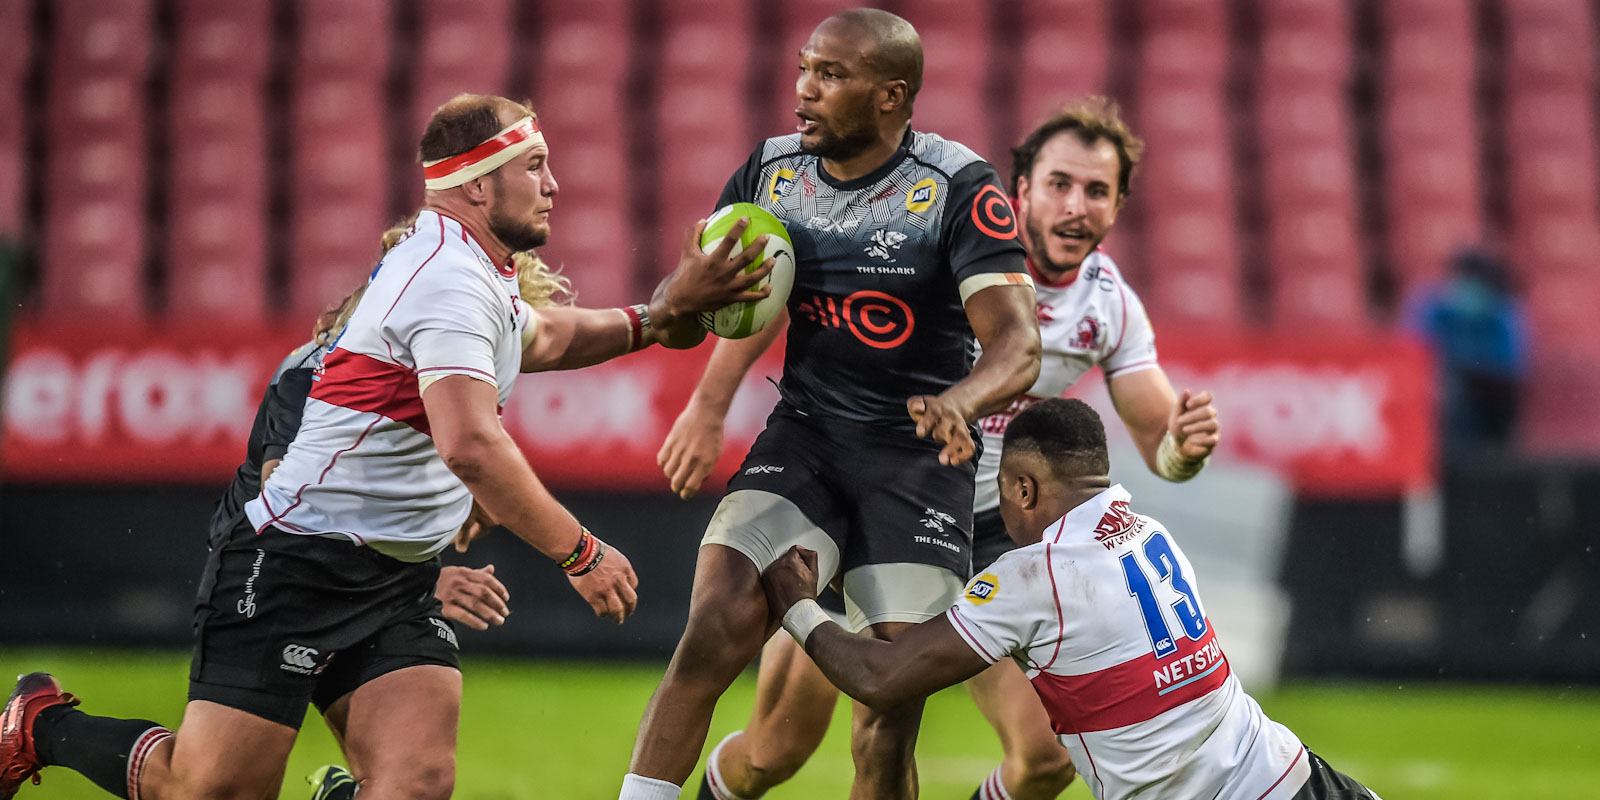 The Cell C Sharks and Emirates Lions will face off in the second round of the Rainbow Cup.